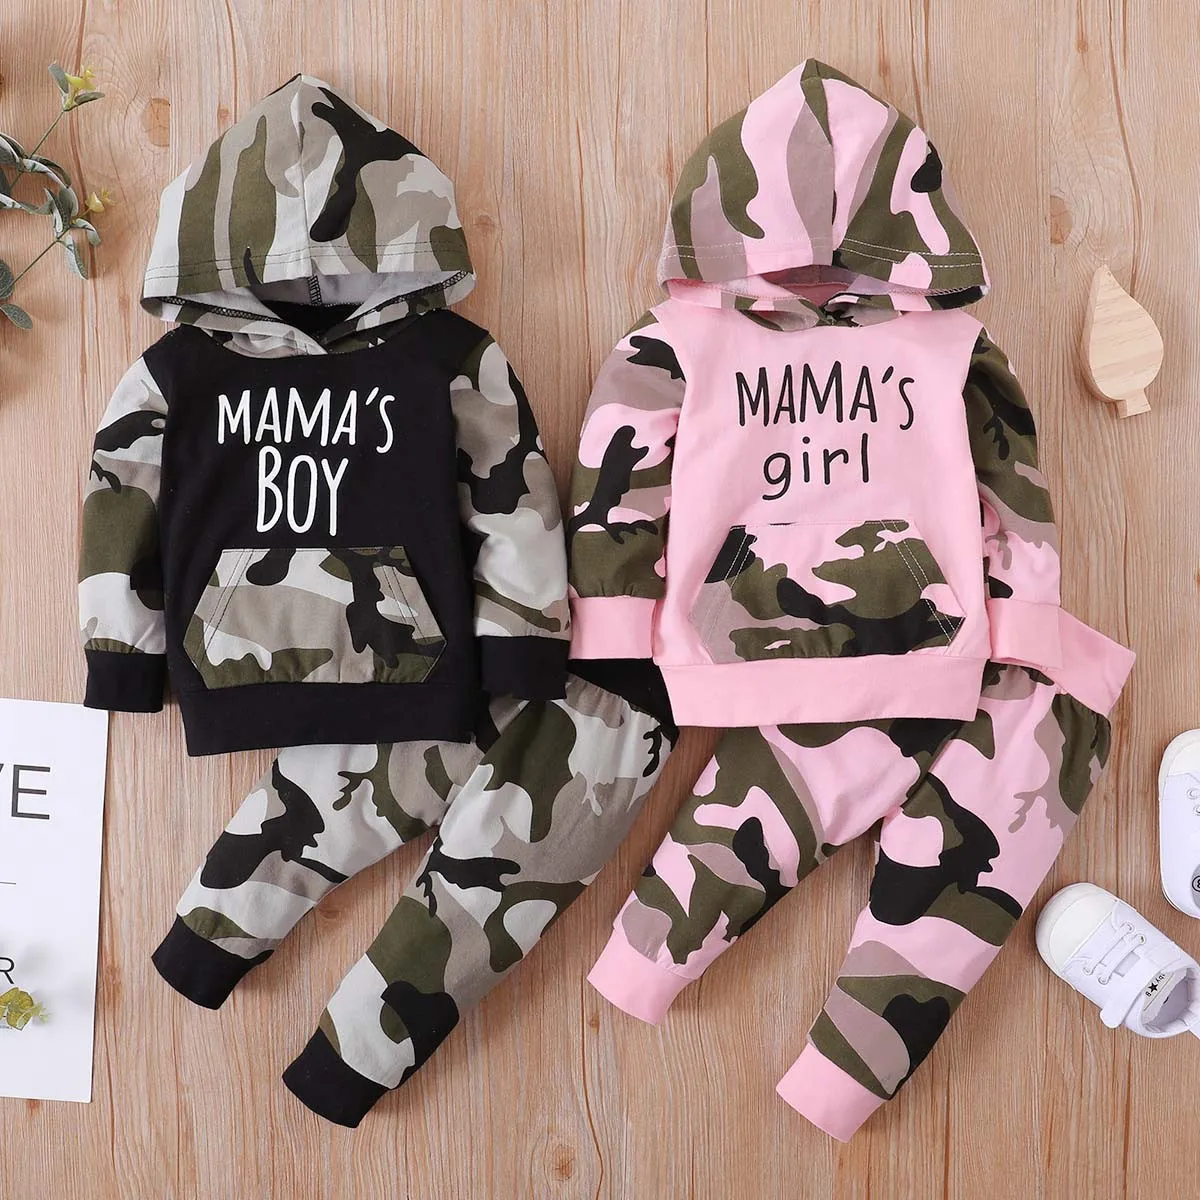 Infant Baby Boys Girls Pants Set Camouflage Hoodie Tops Long Sleeve Sweatshirt+Long Pants Daddy's Boy Outfits Fall Winter Clothes